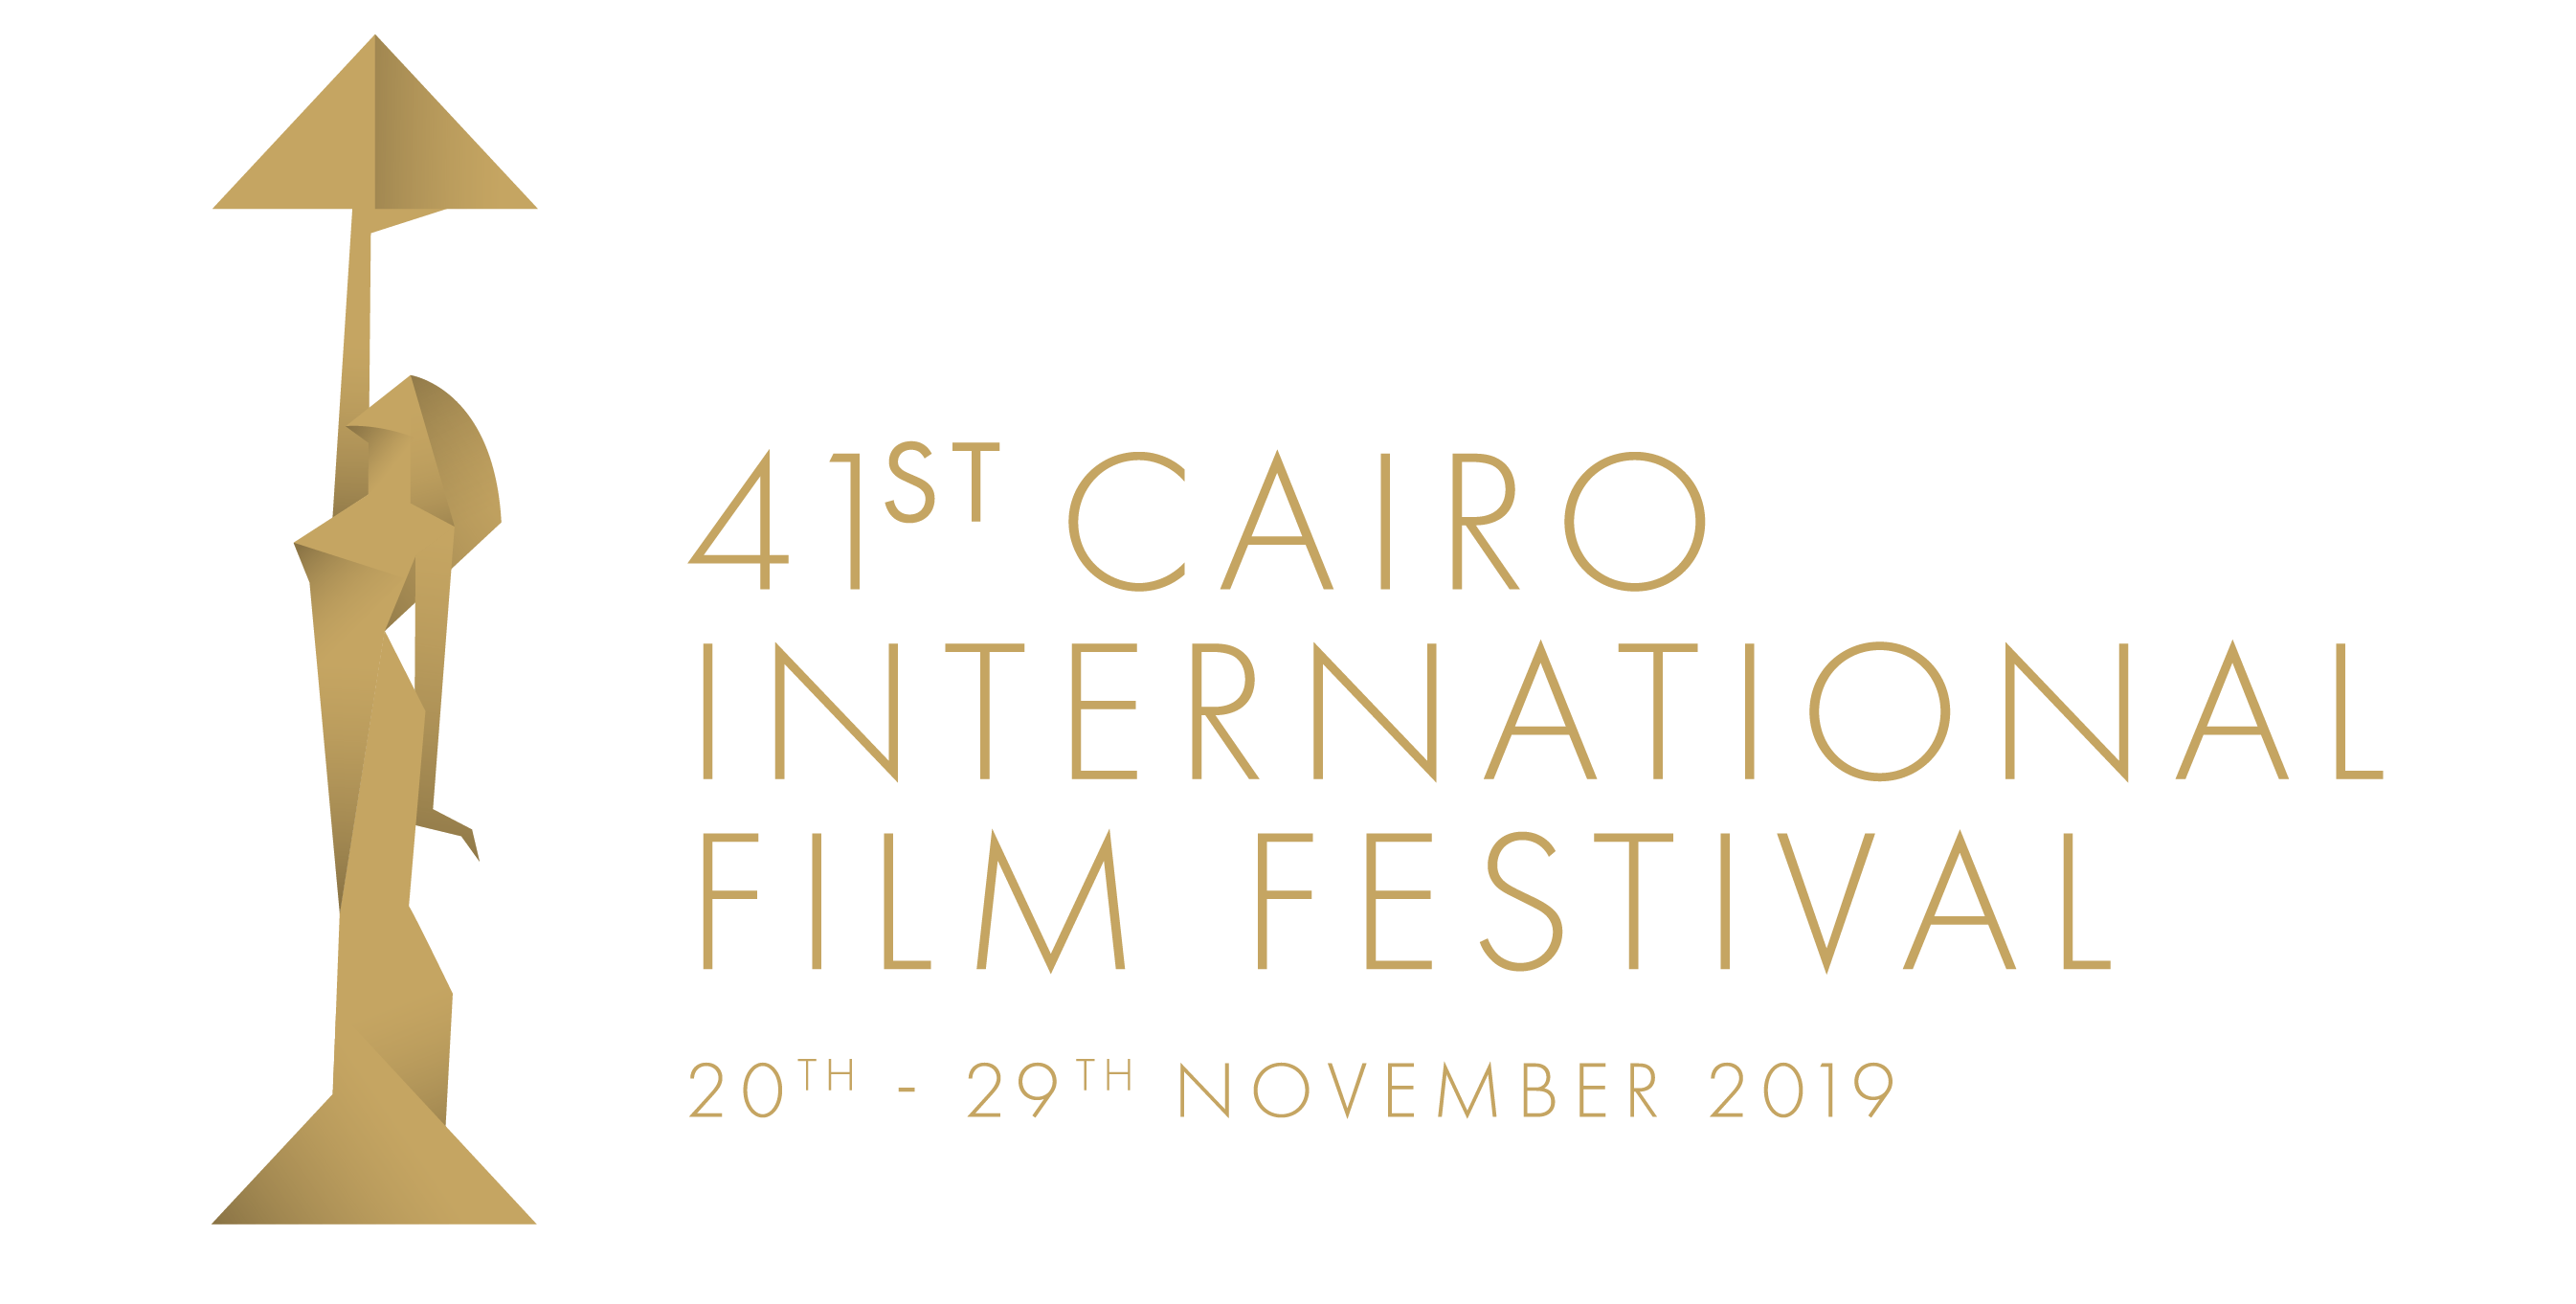 Cairo International Film Festival to reveal its details in a press conference on 4 November